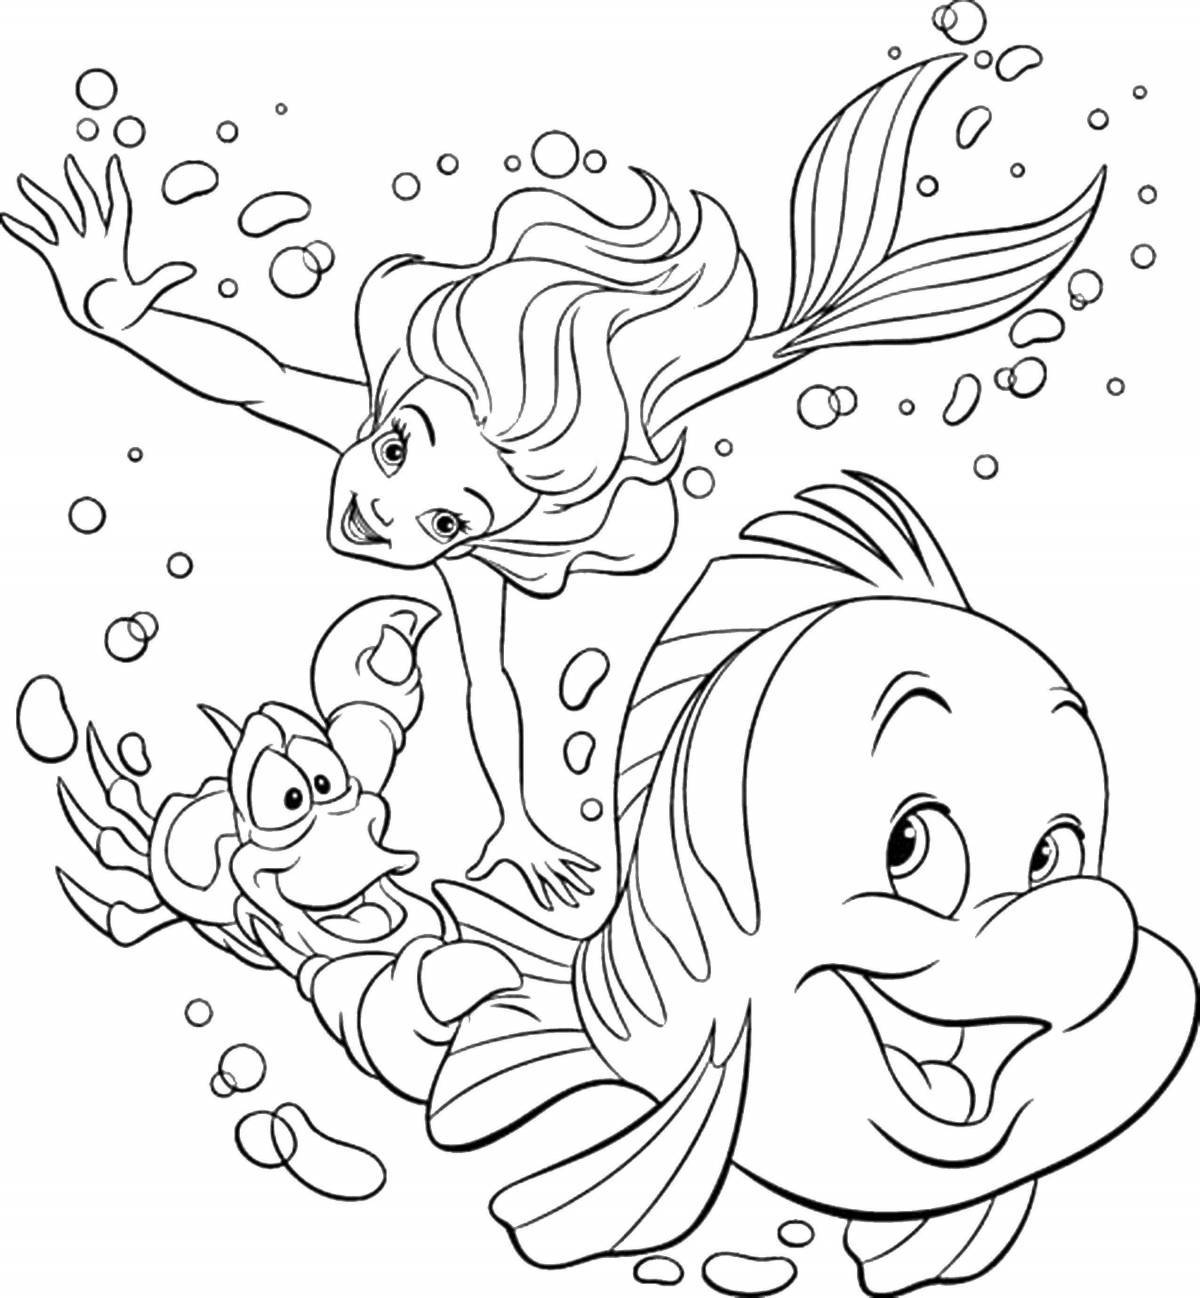 Fashionable coloring pages popular